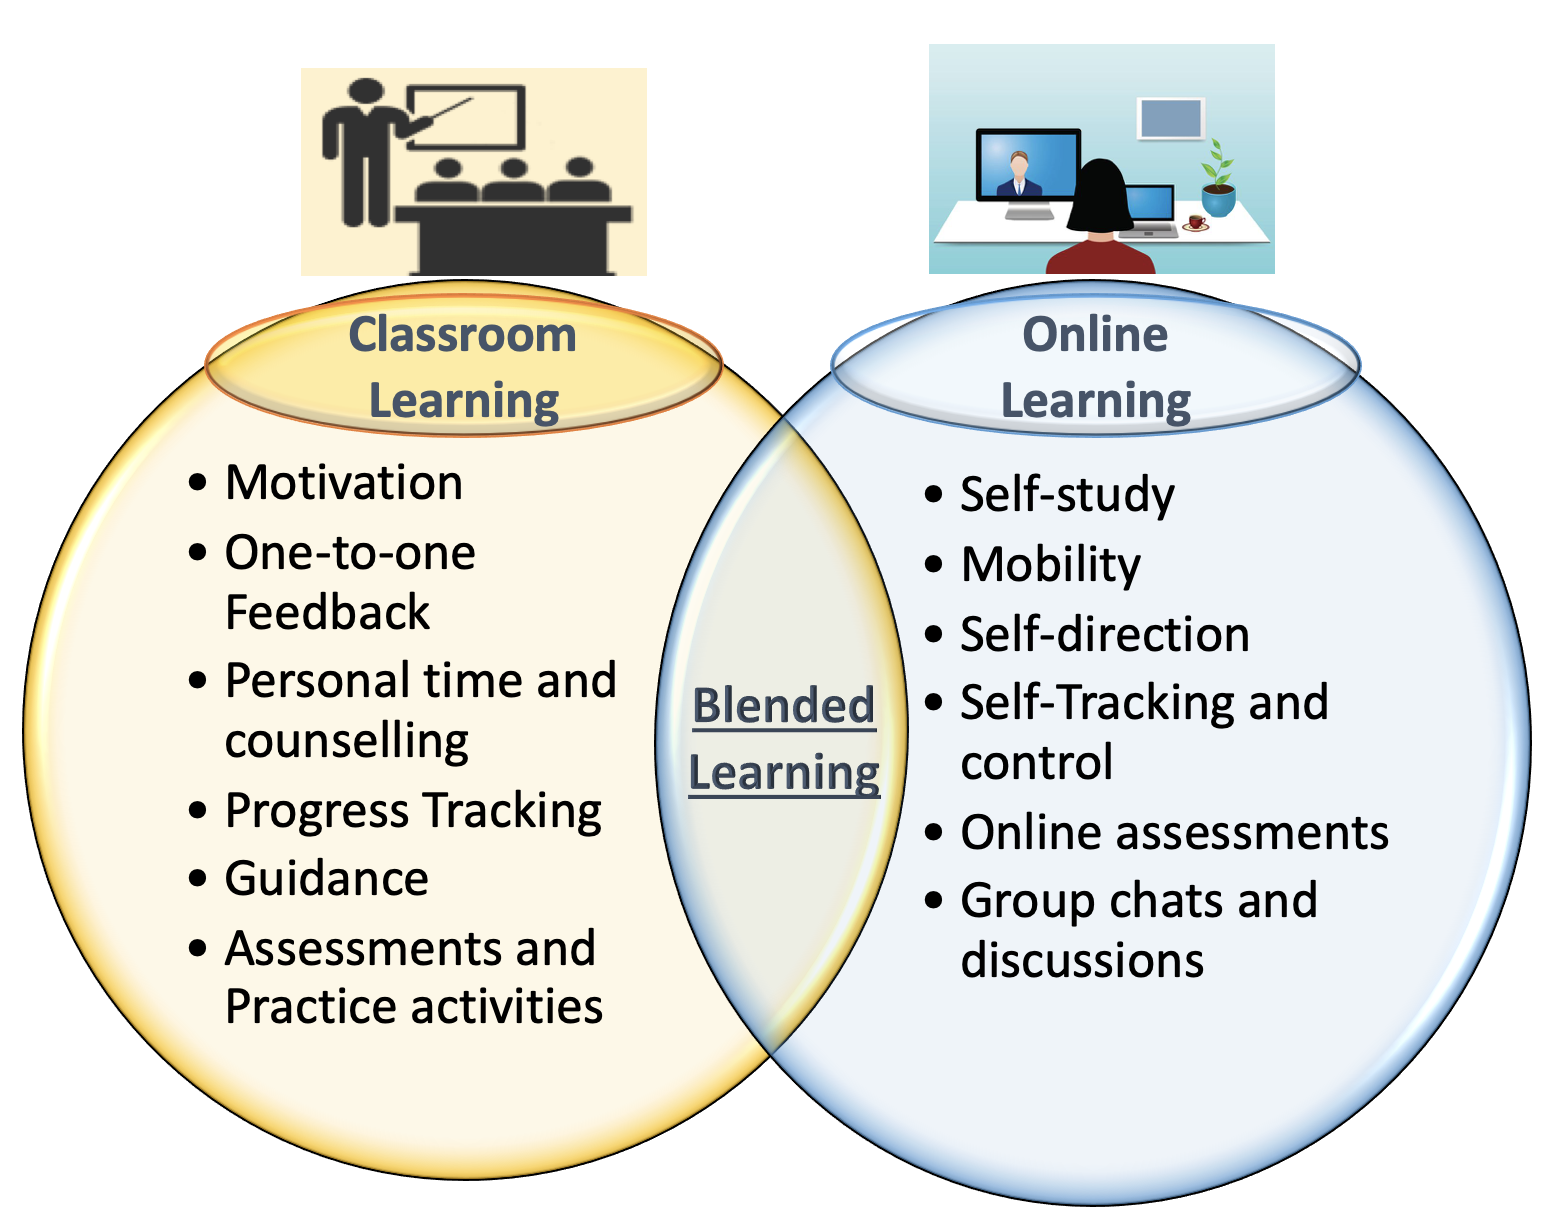 master thesis blended learning